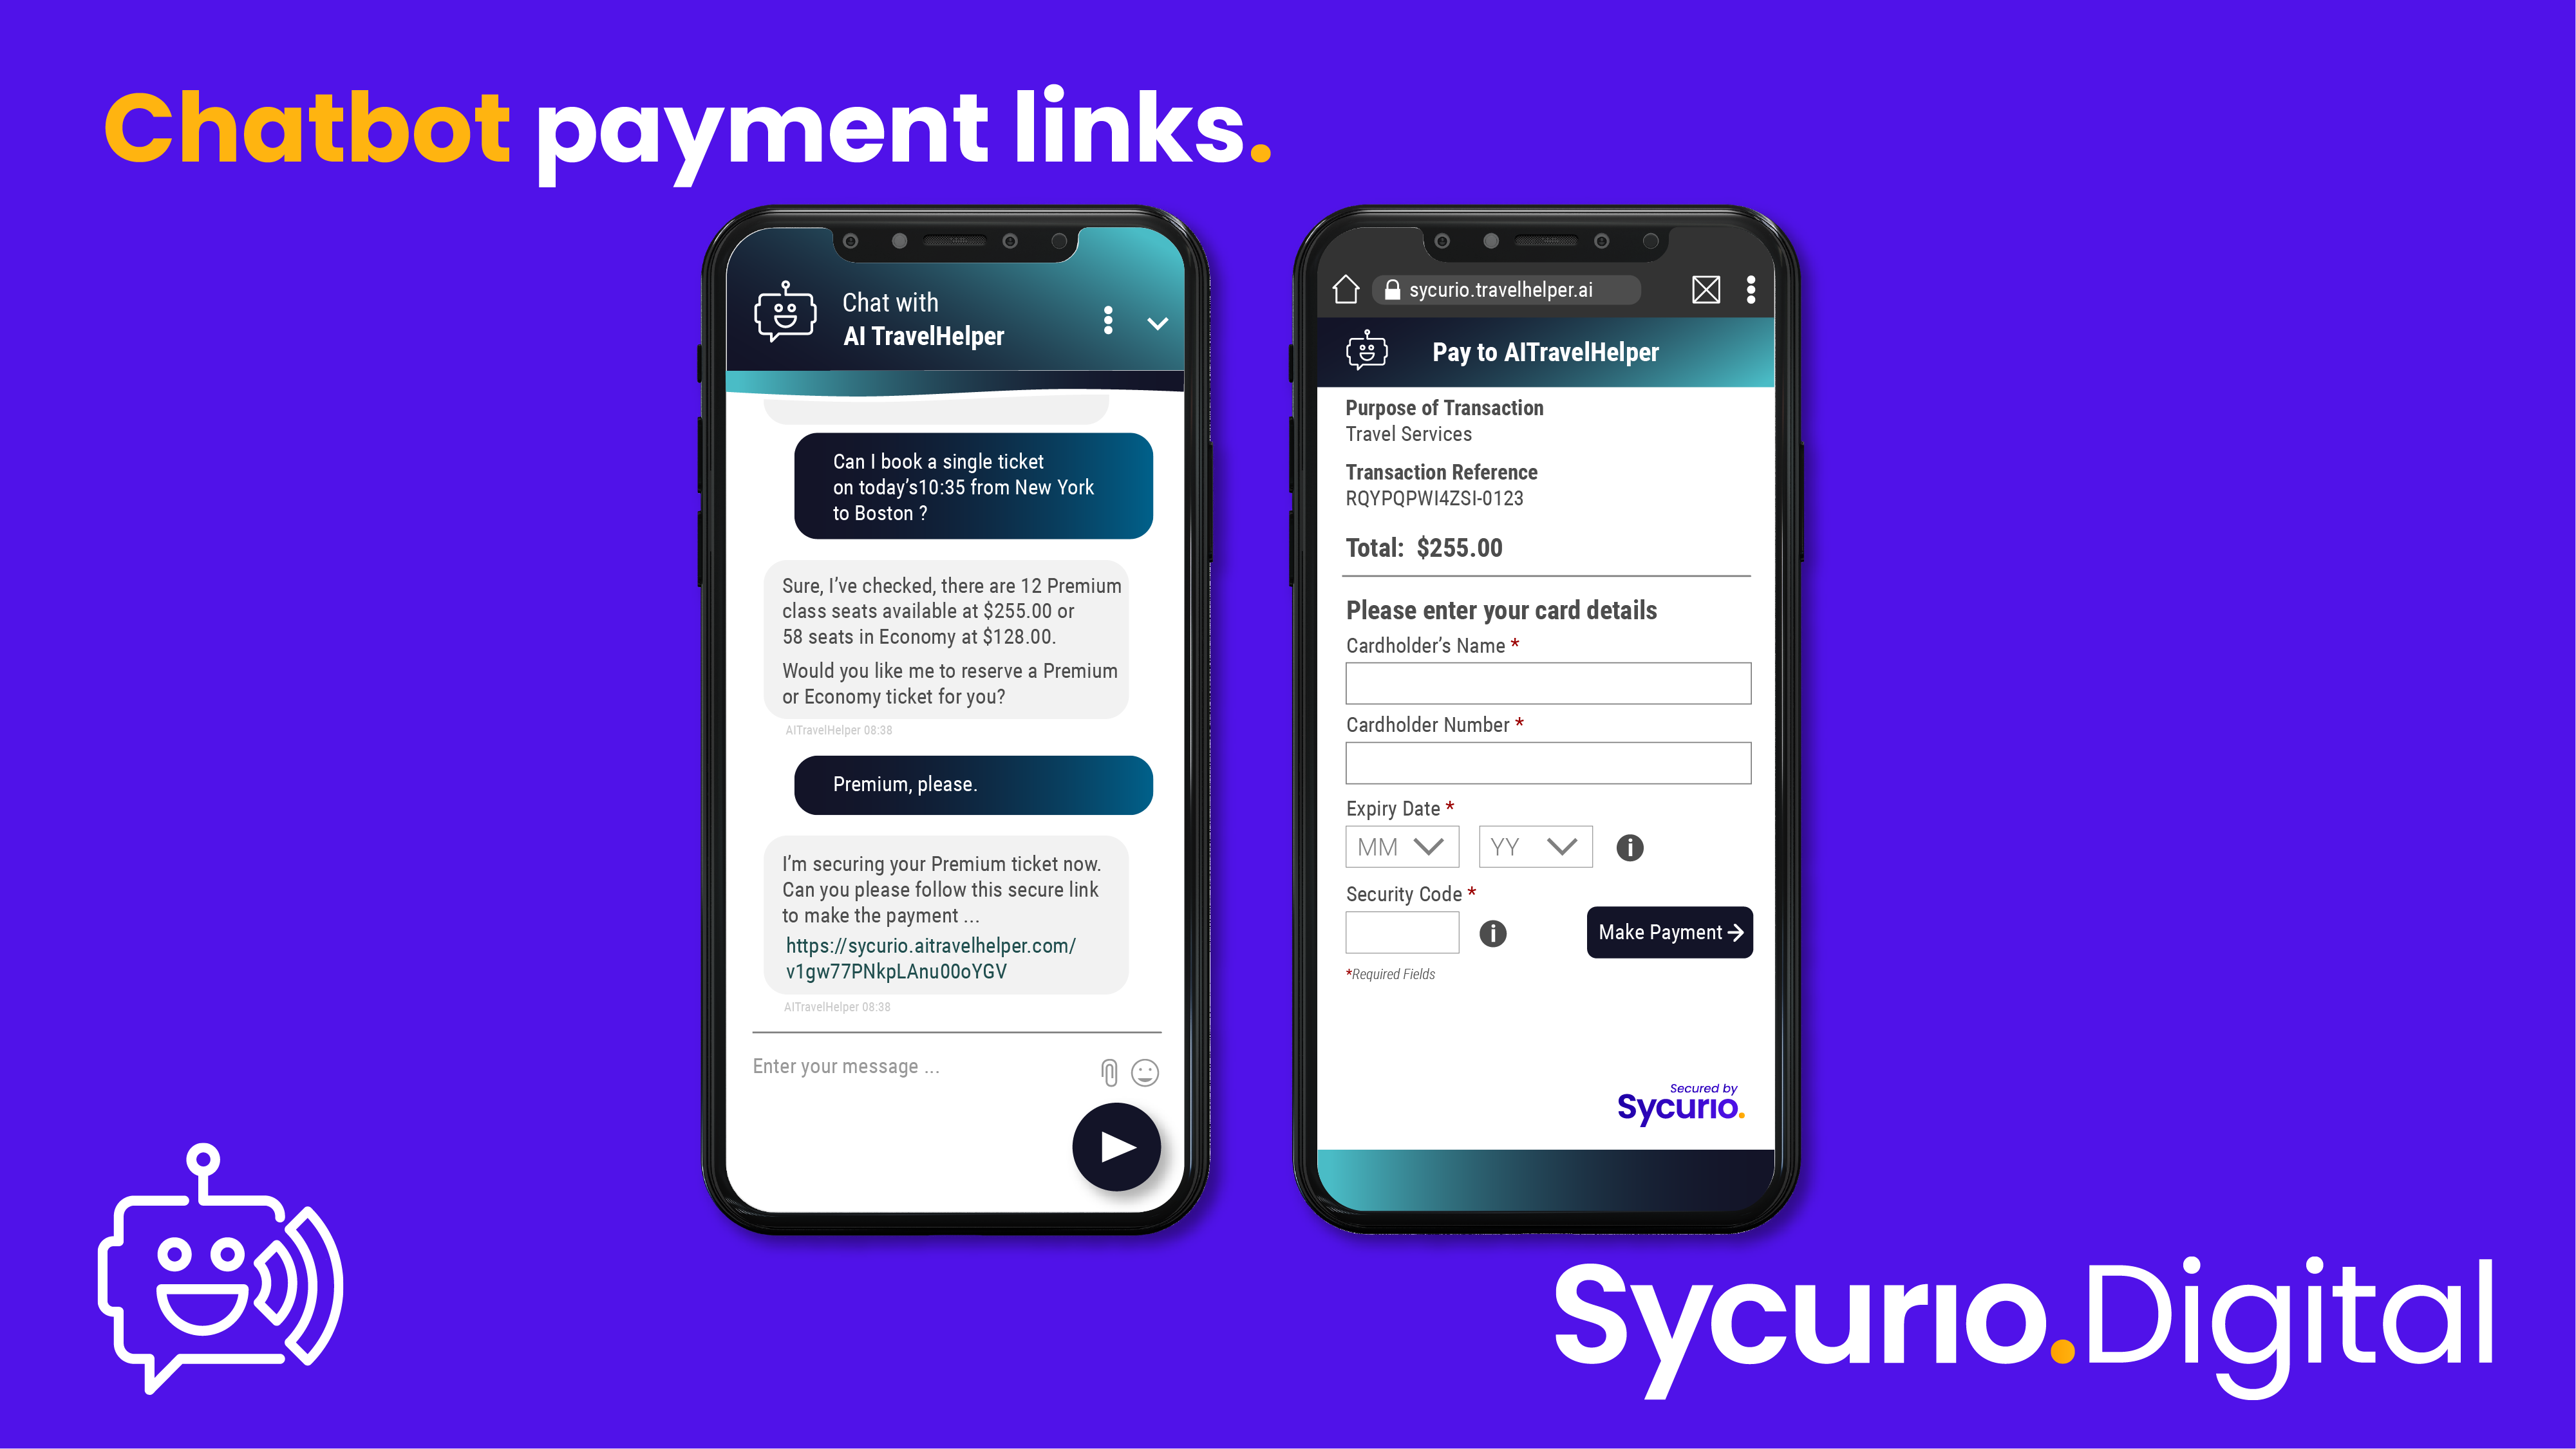 Sycurio.Digital Omnichannel Payment Links chatbot